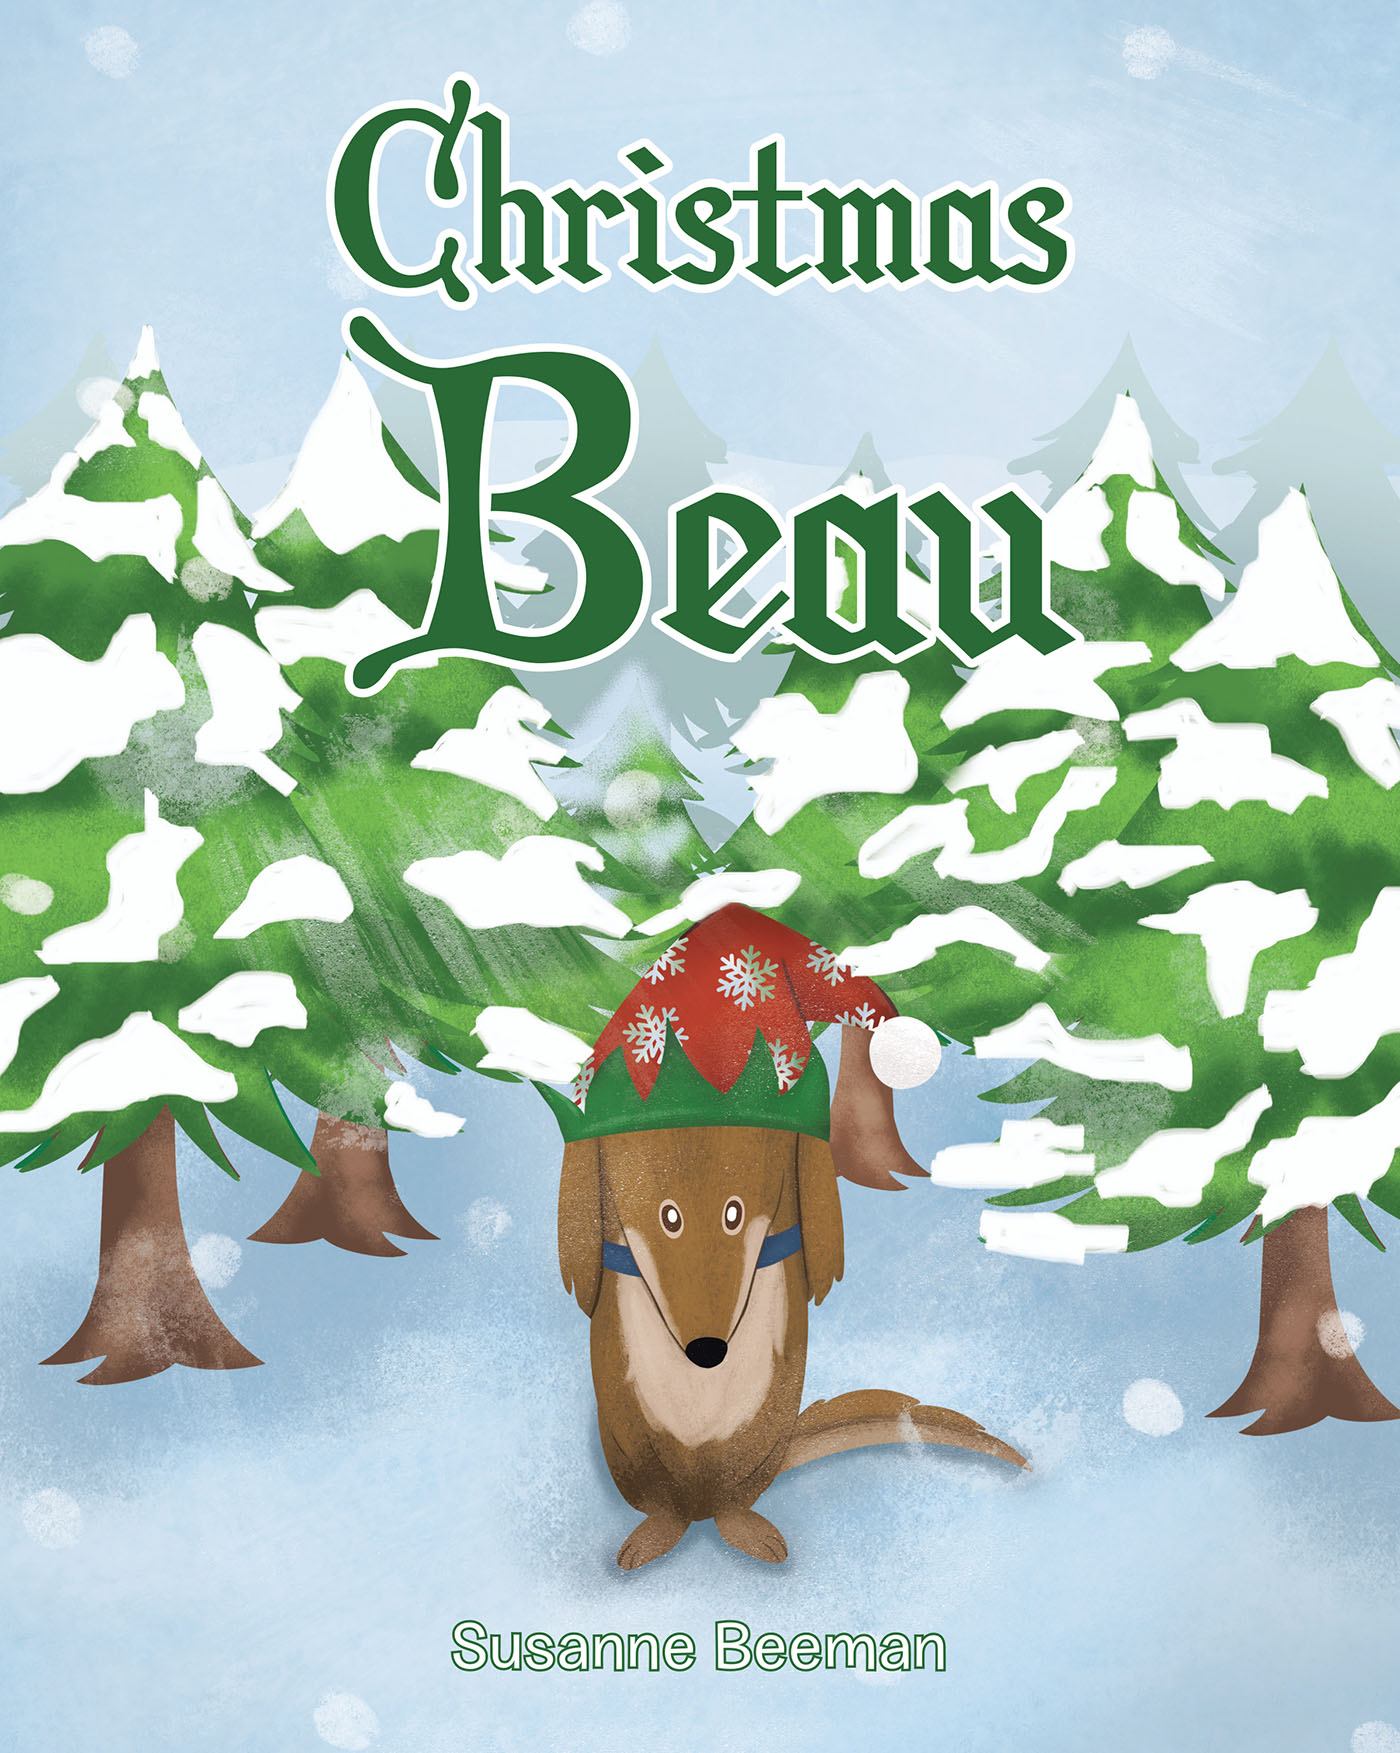 Susanne Beeman’s Newly Released "Christmas Beau" is a Sweet Holiday Tale That Finds an Adventurous Dachshund Causing Mischief